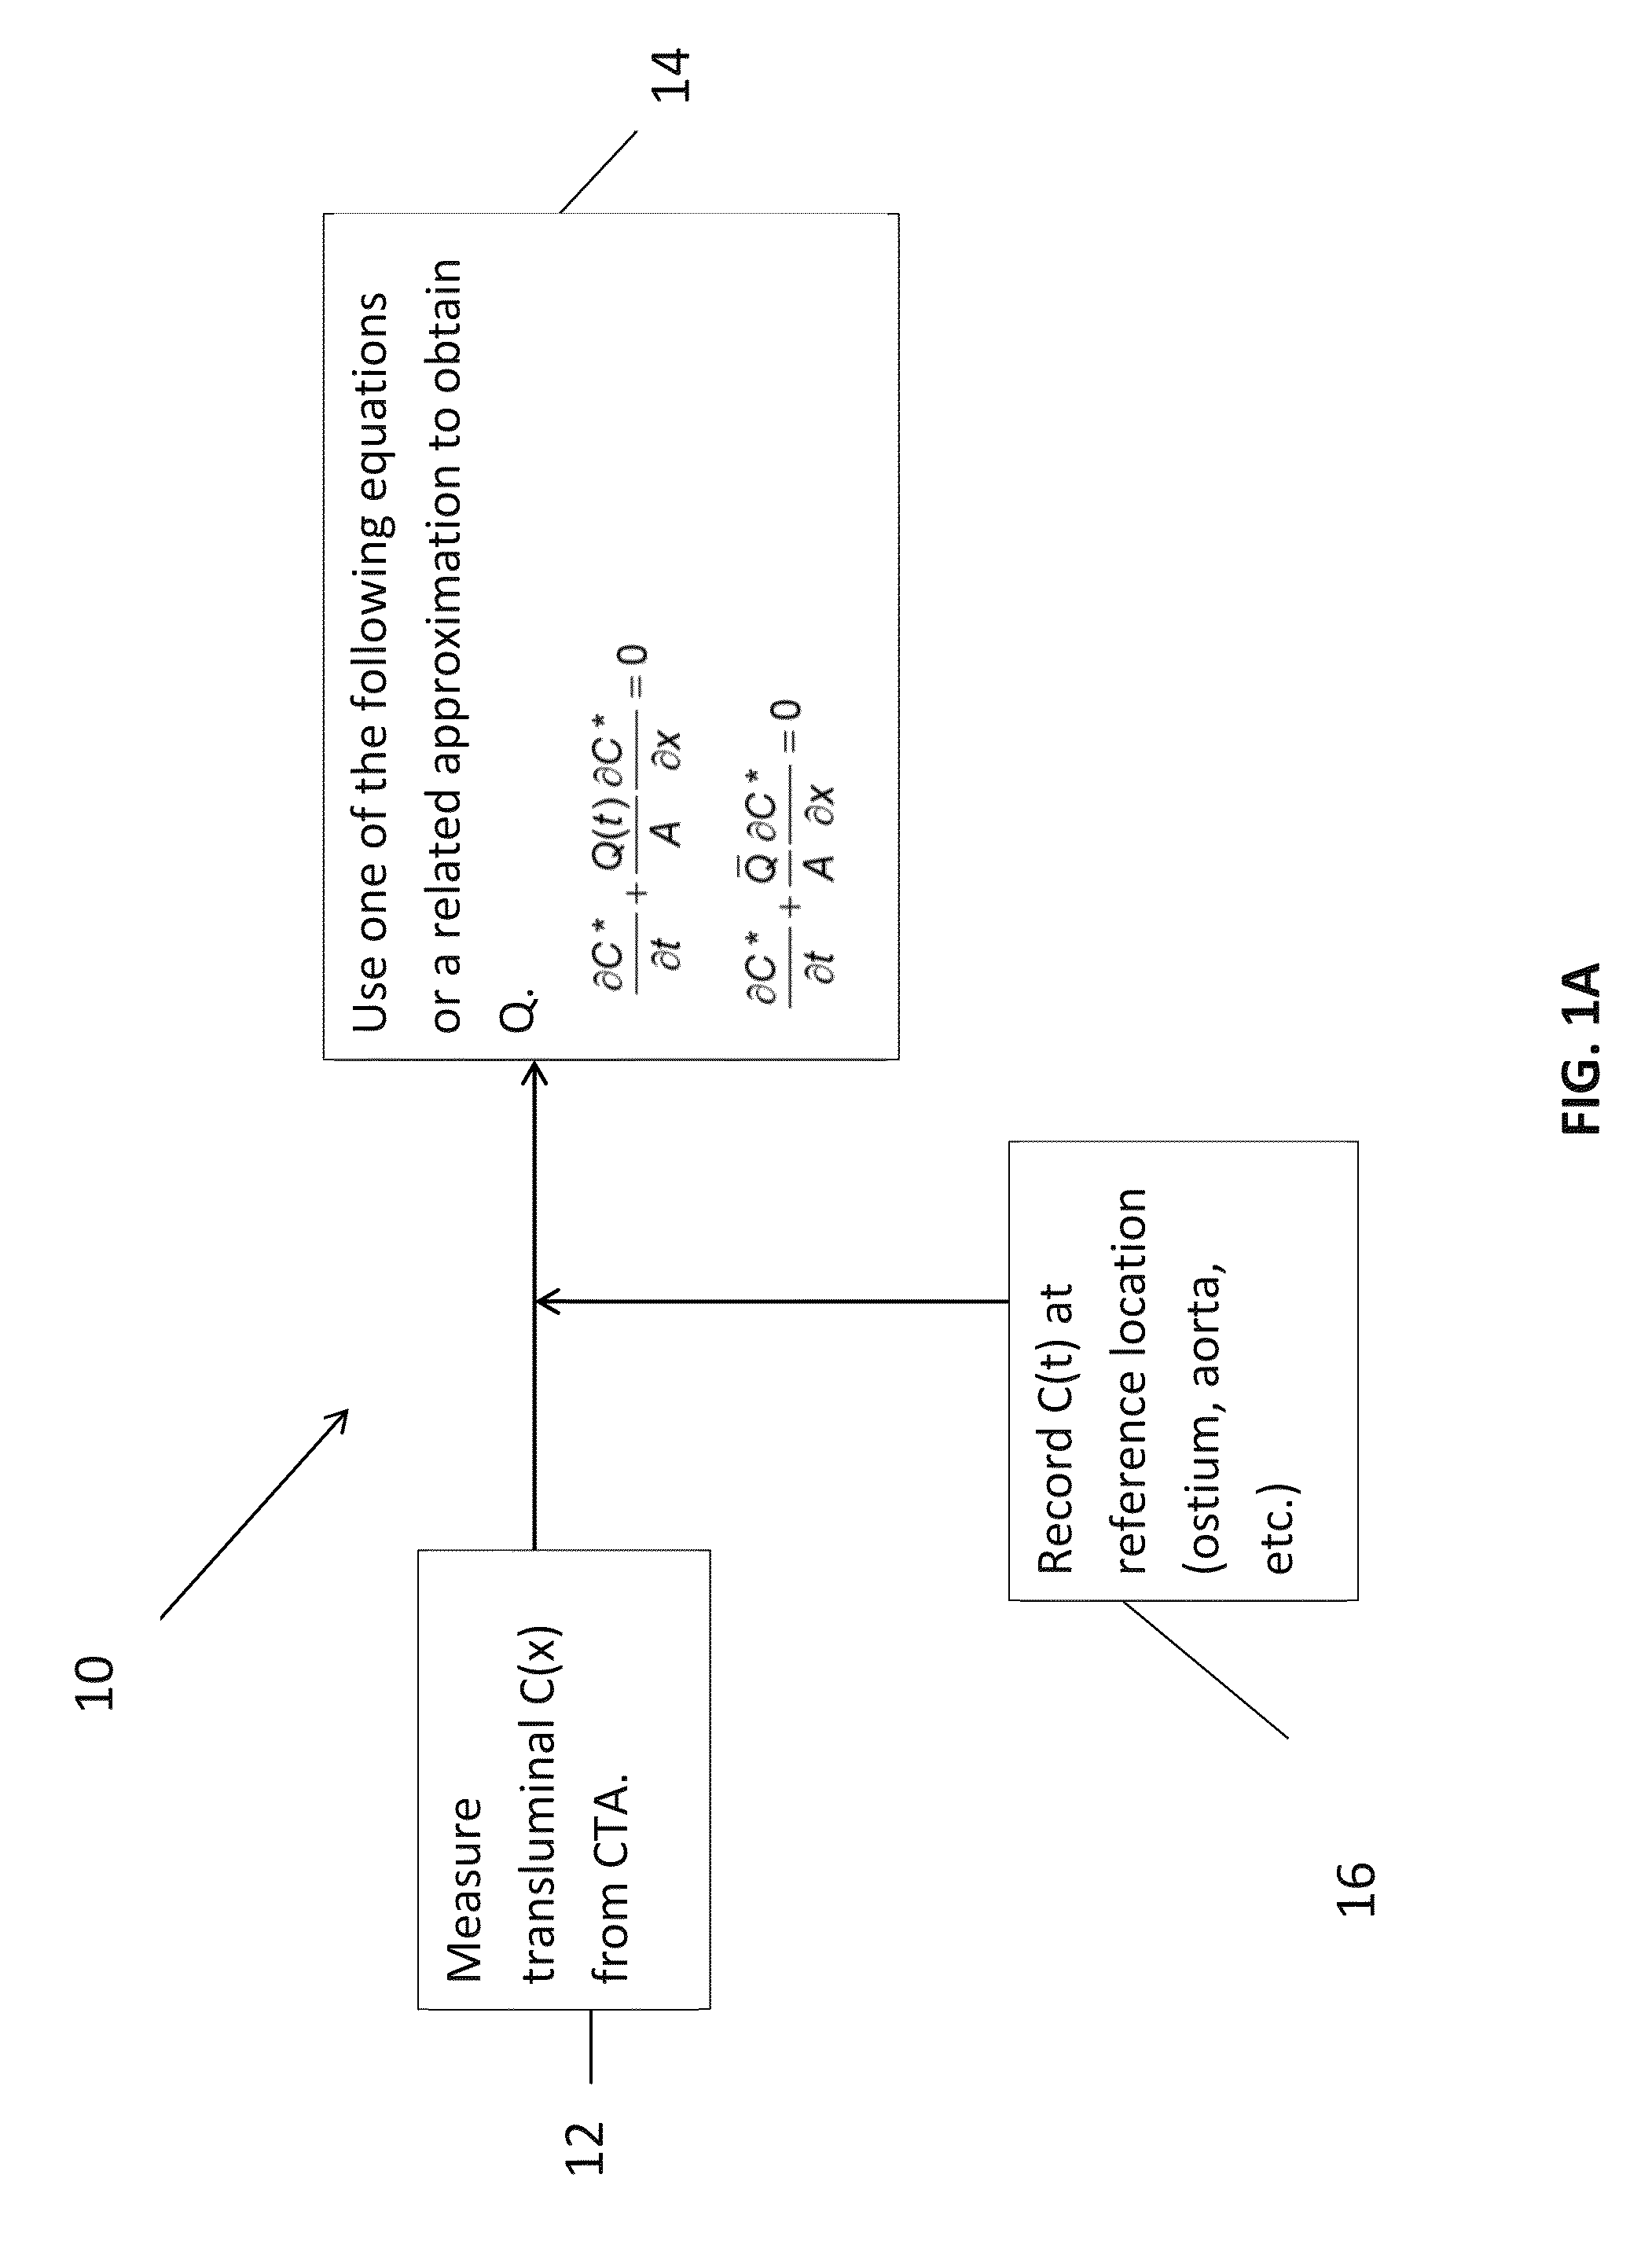 Method for Estimating Flow Rates, Pressure Gradients, Coronary Flow Reserve, and Fractional Flow Reserve from Patient Specific Computed Tomography Angiogram-Based Contrast Distribution Data